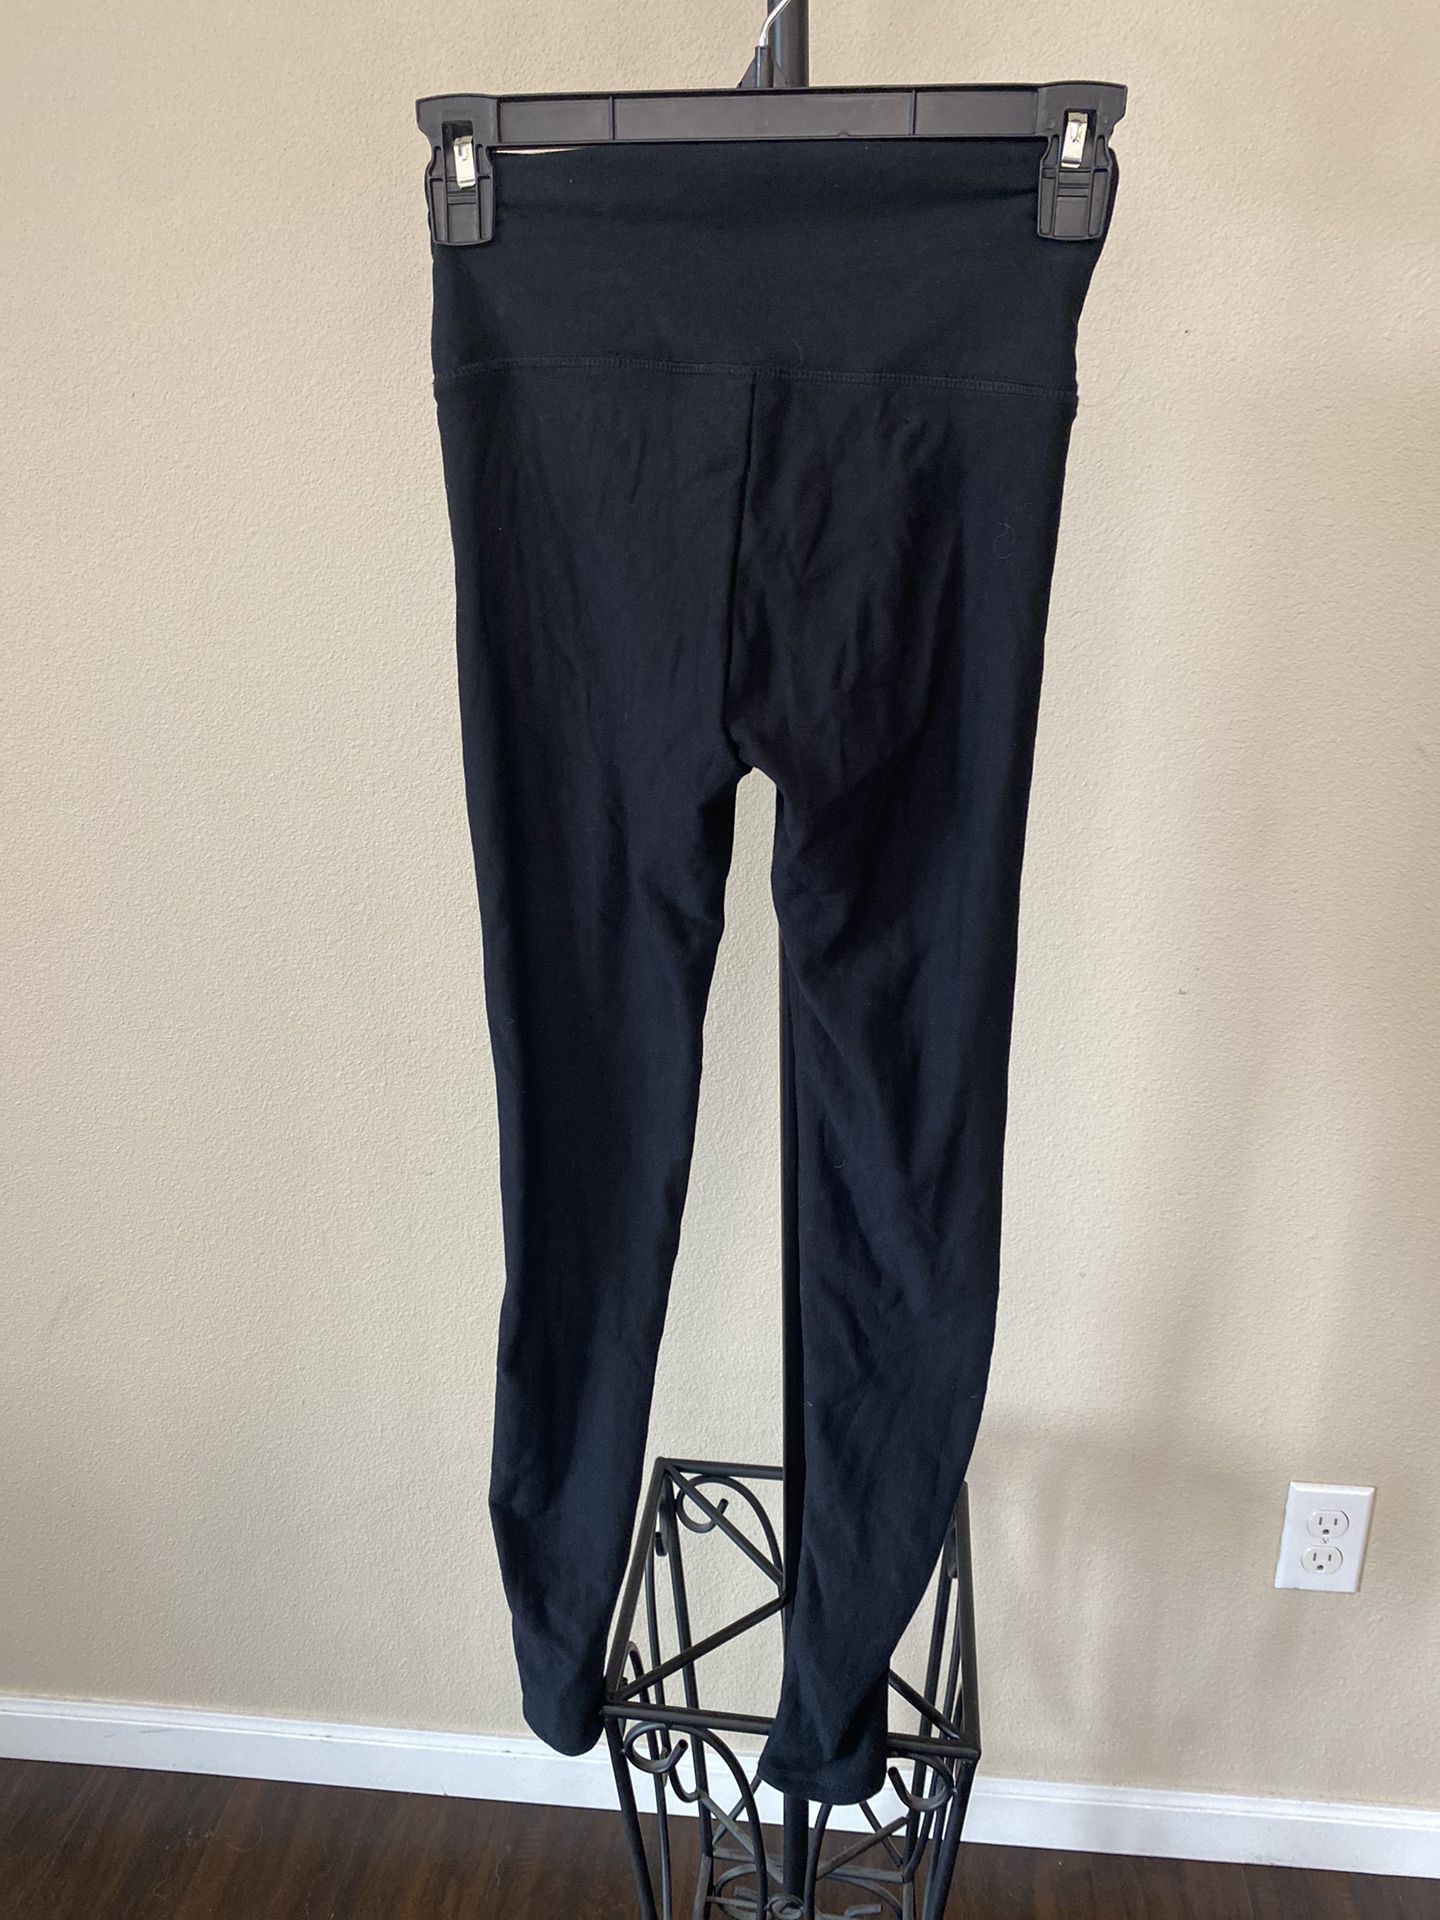 Orvis Womens Midweight Fleece Lined Legging for Sale in Mount Vernon ...